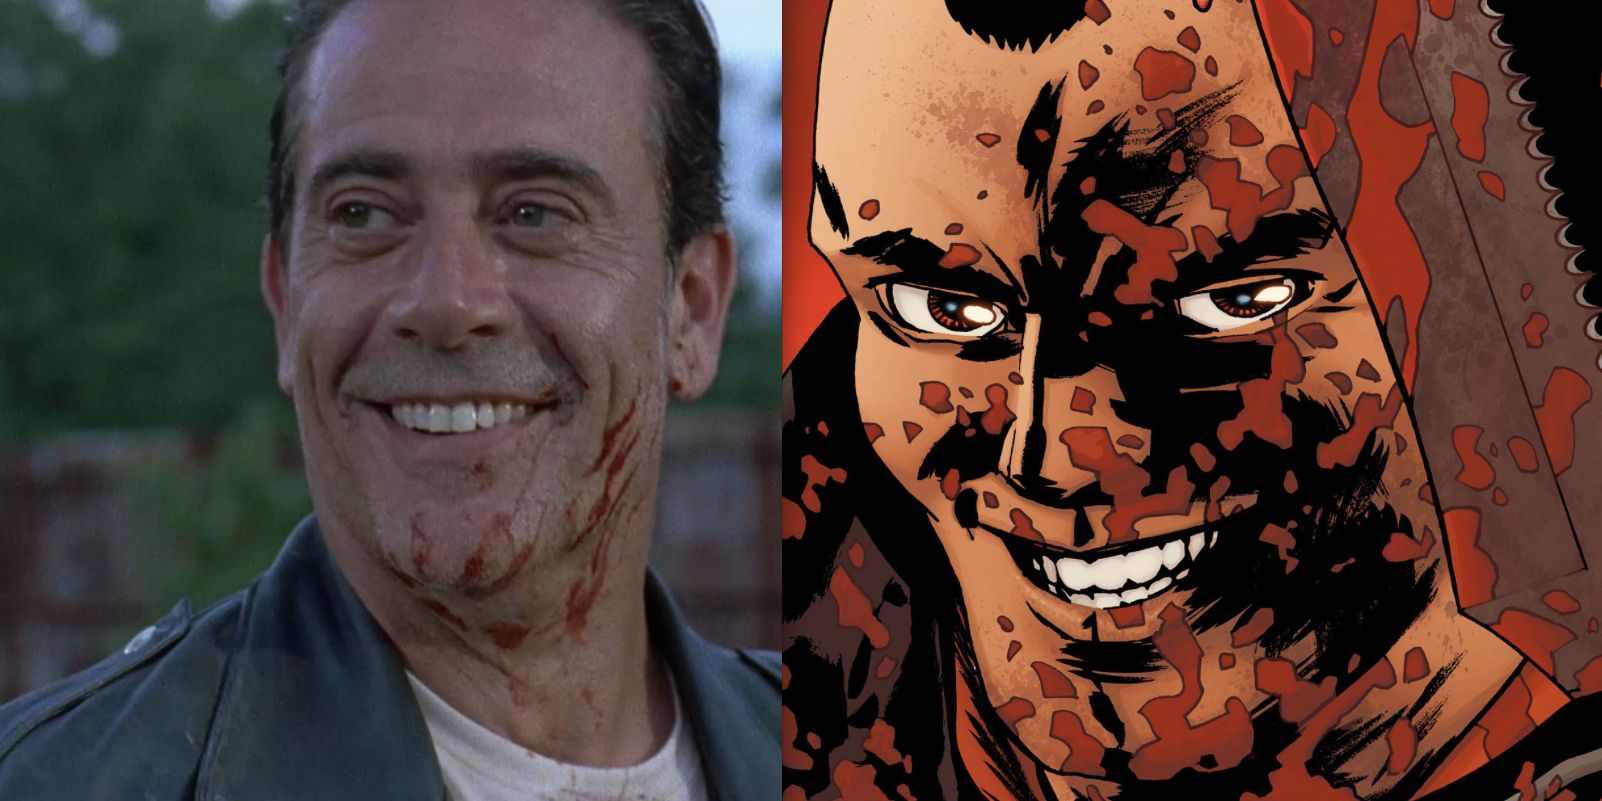 Negan in The Walking Dead Show and Comic